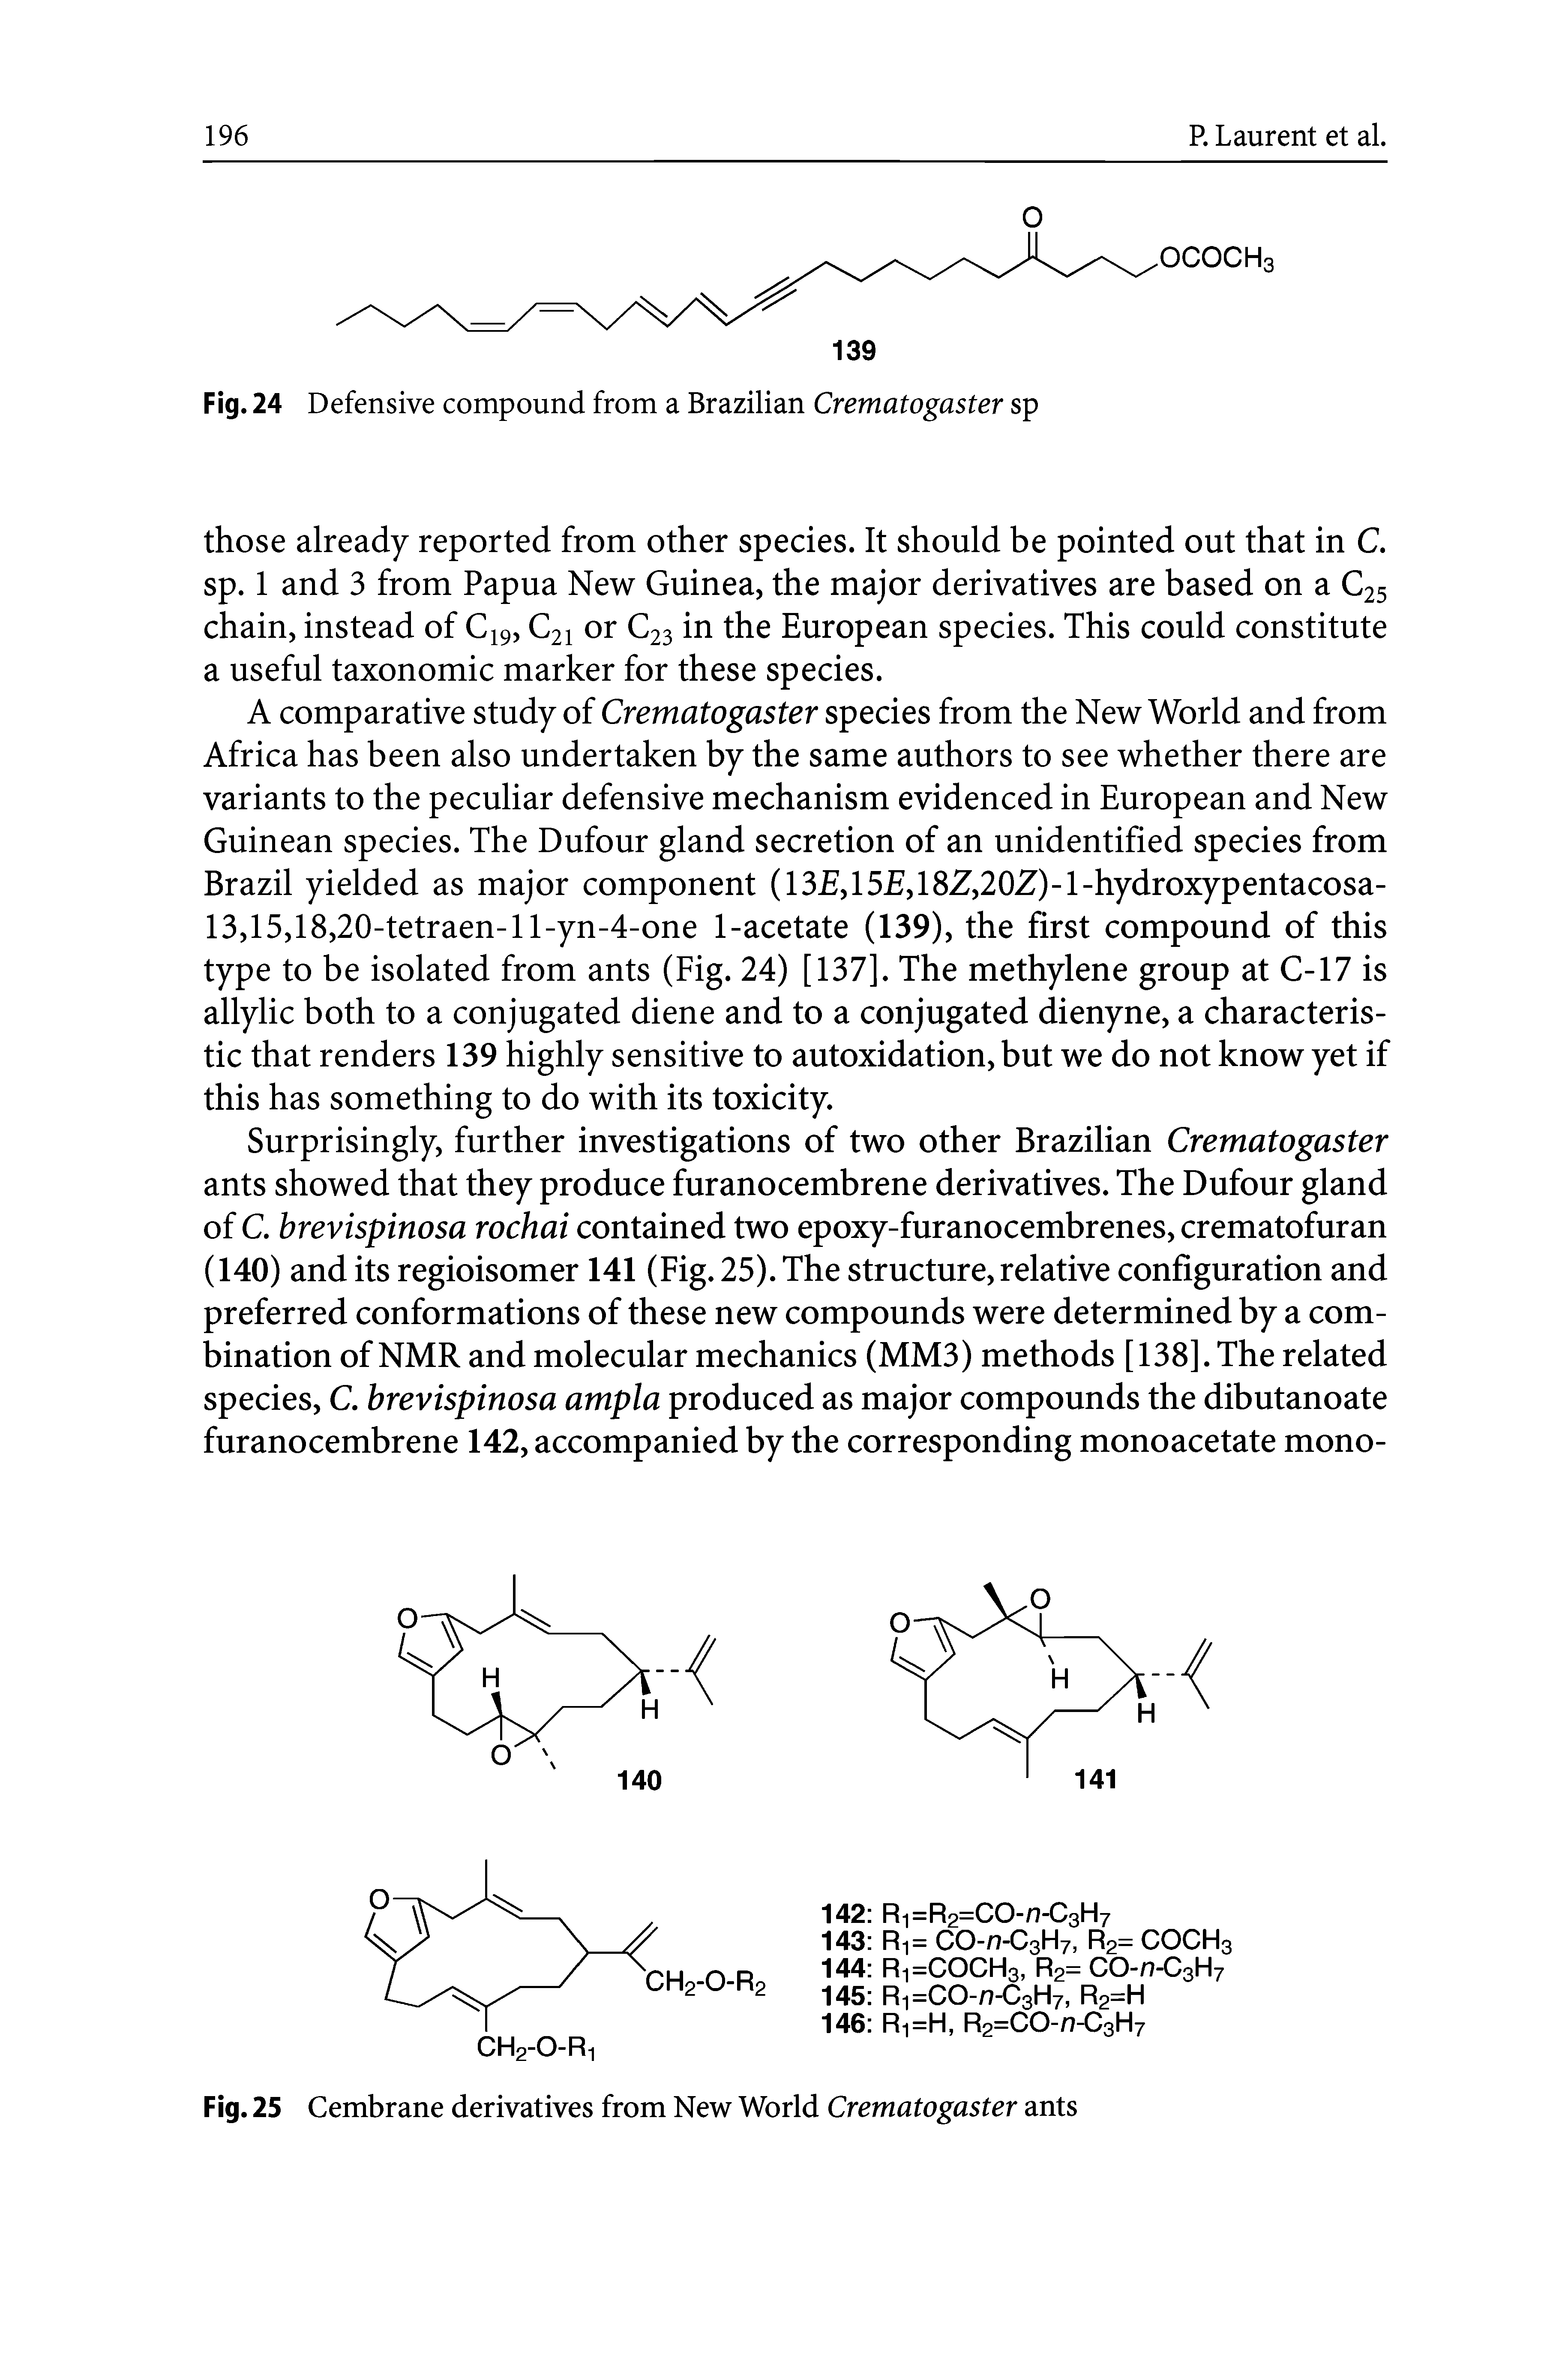 Fig. 25 Cembrane derivatives from New World Crematogaster ants...